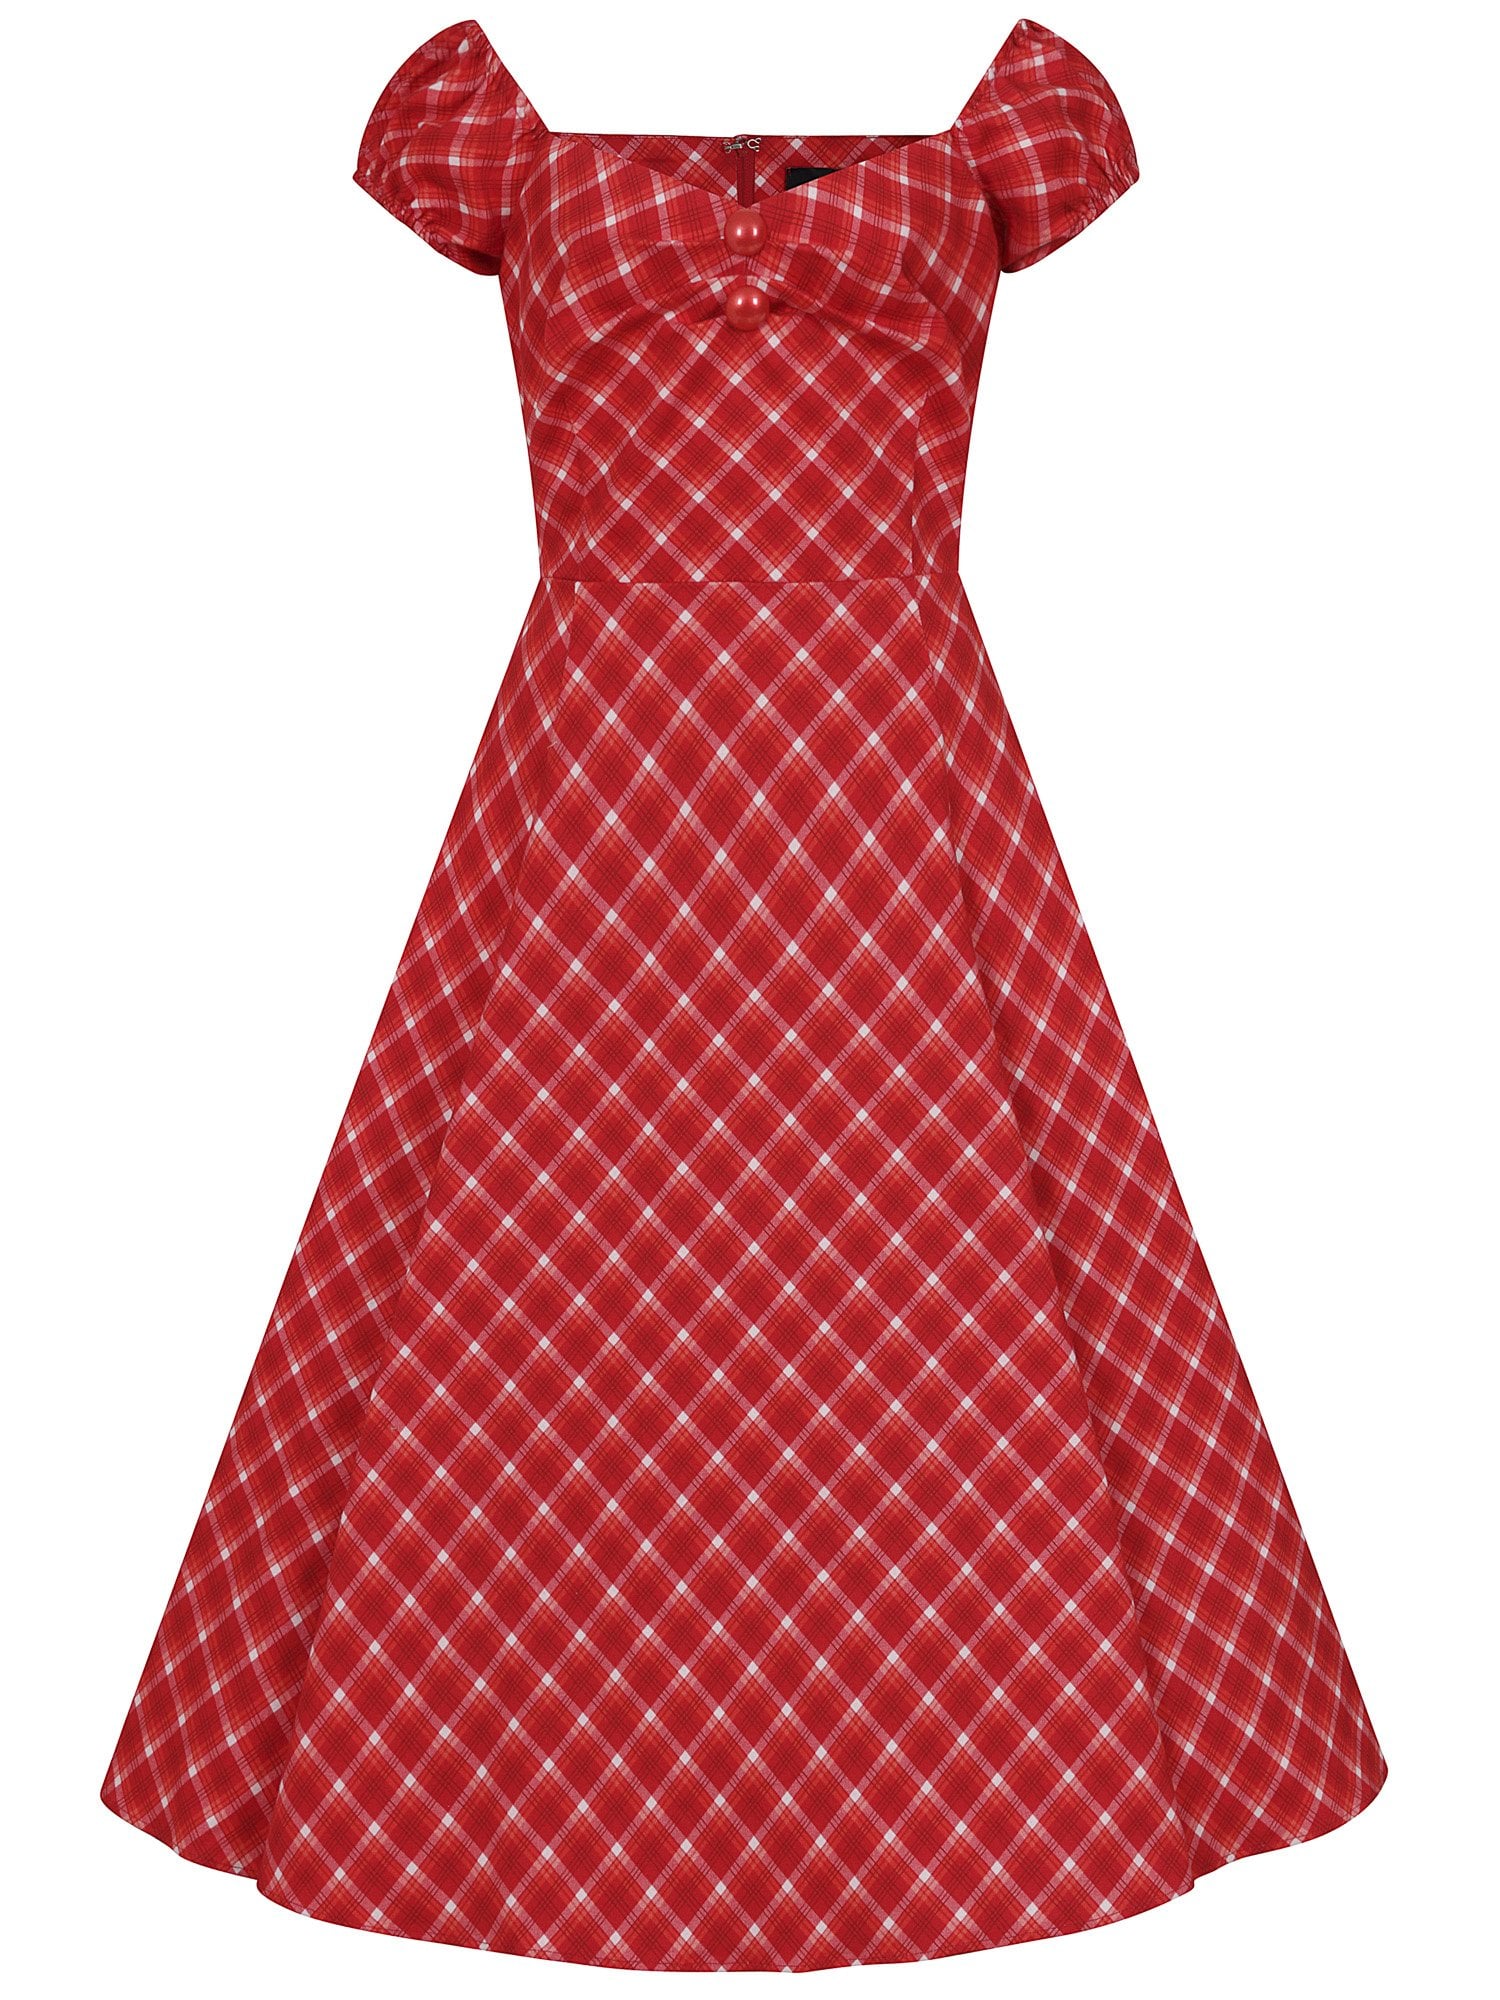 DOLORES HOLIDAY ROMANCE CHECK DOLL DRESS